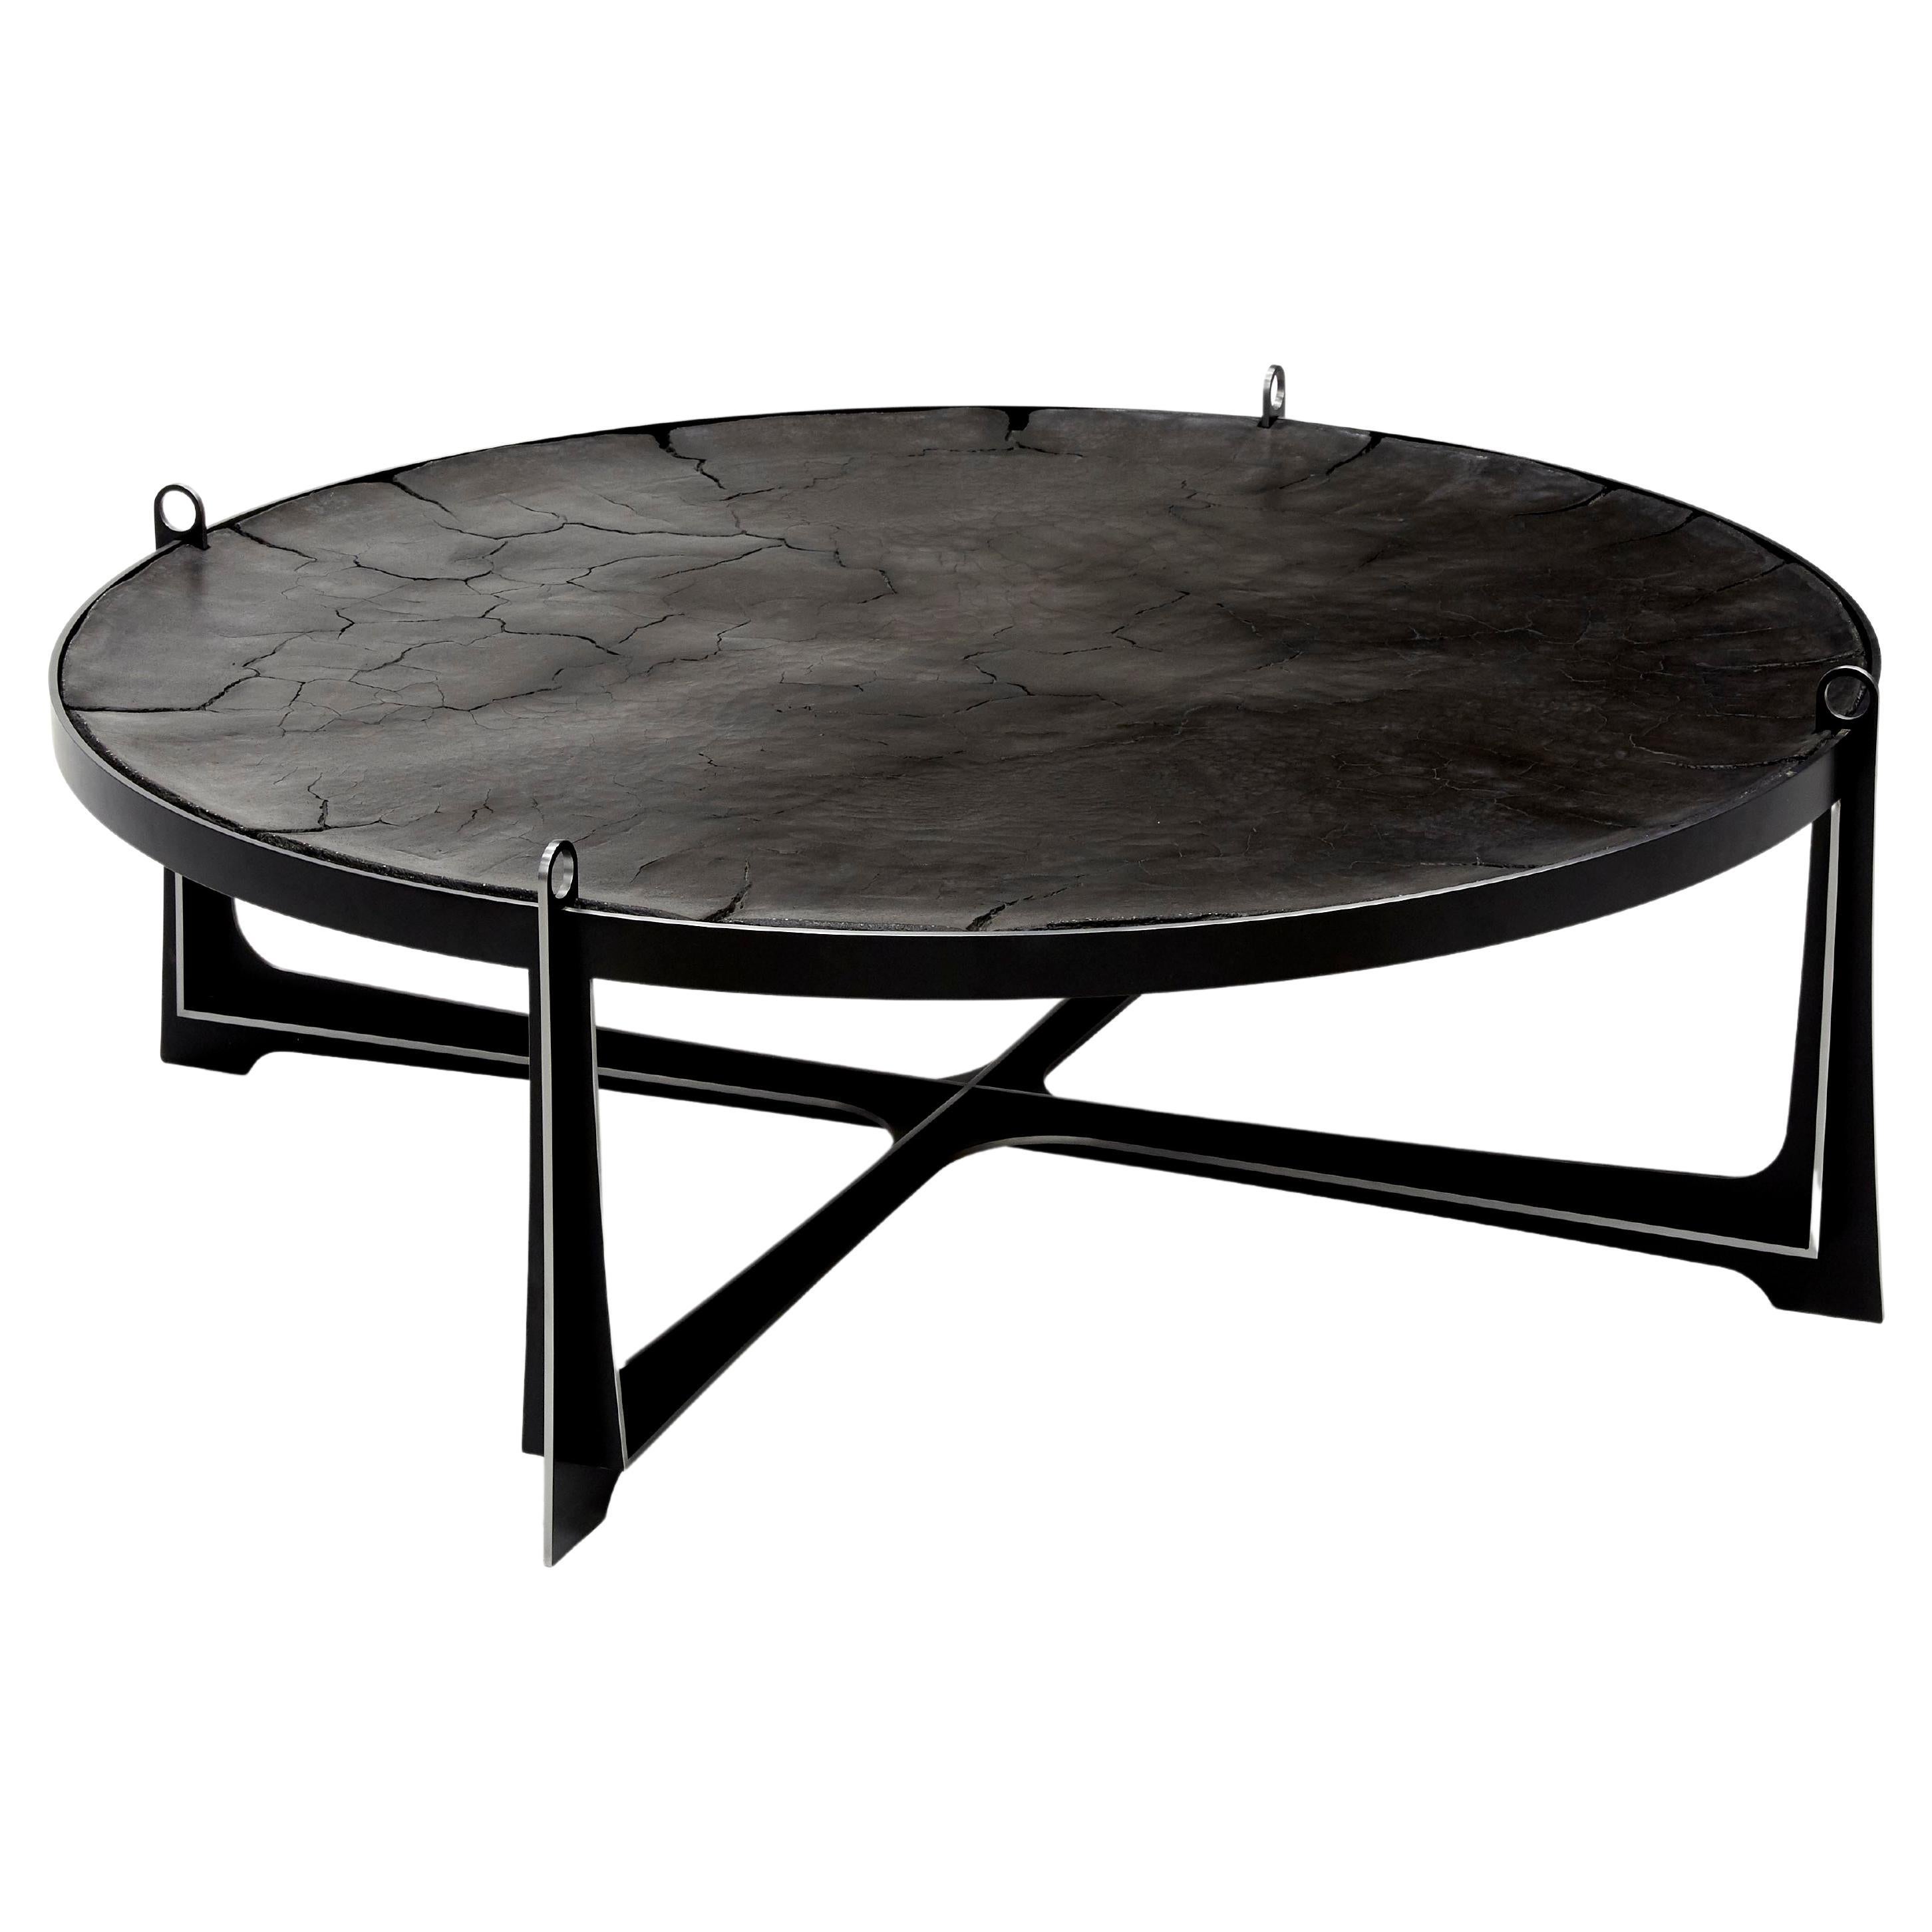 Round Black Coffee Table Atacama with Concrete Top by Erwan Boulloud 